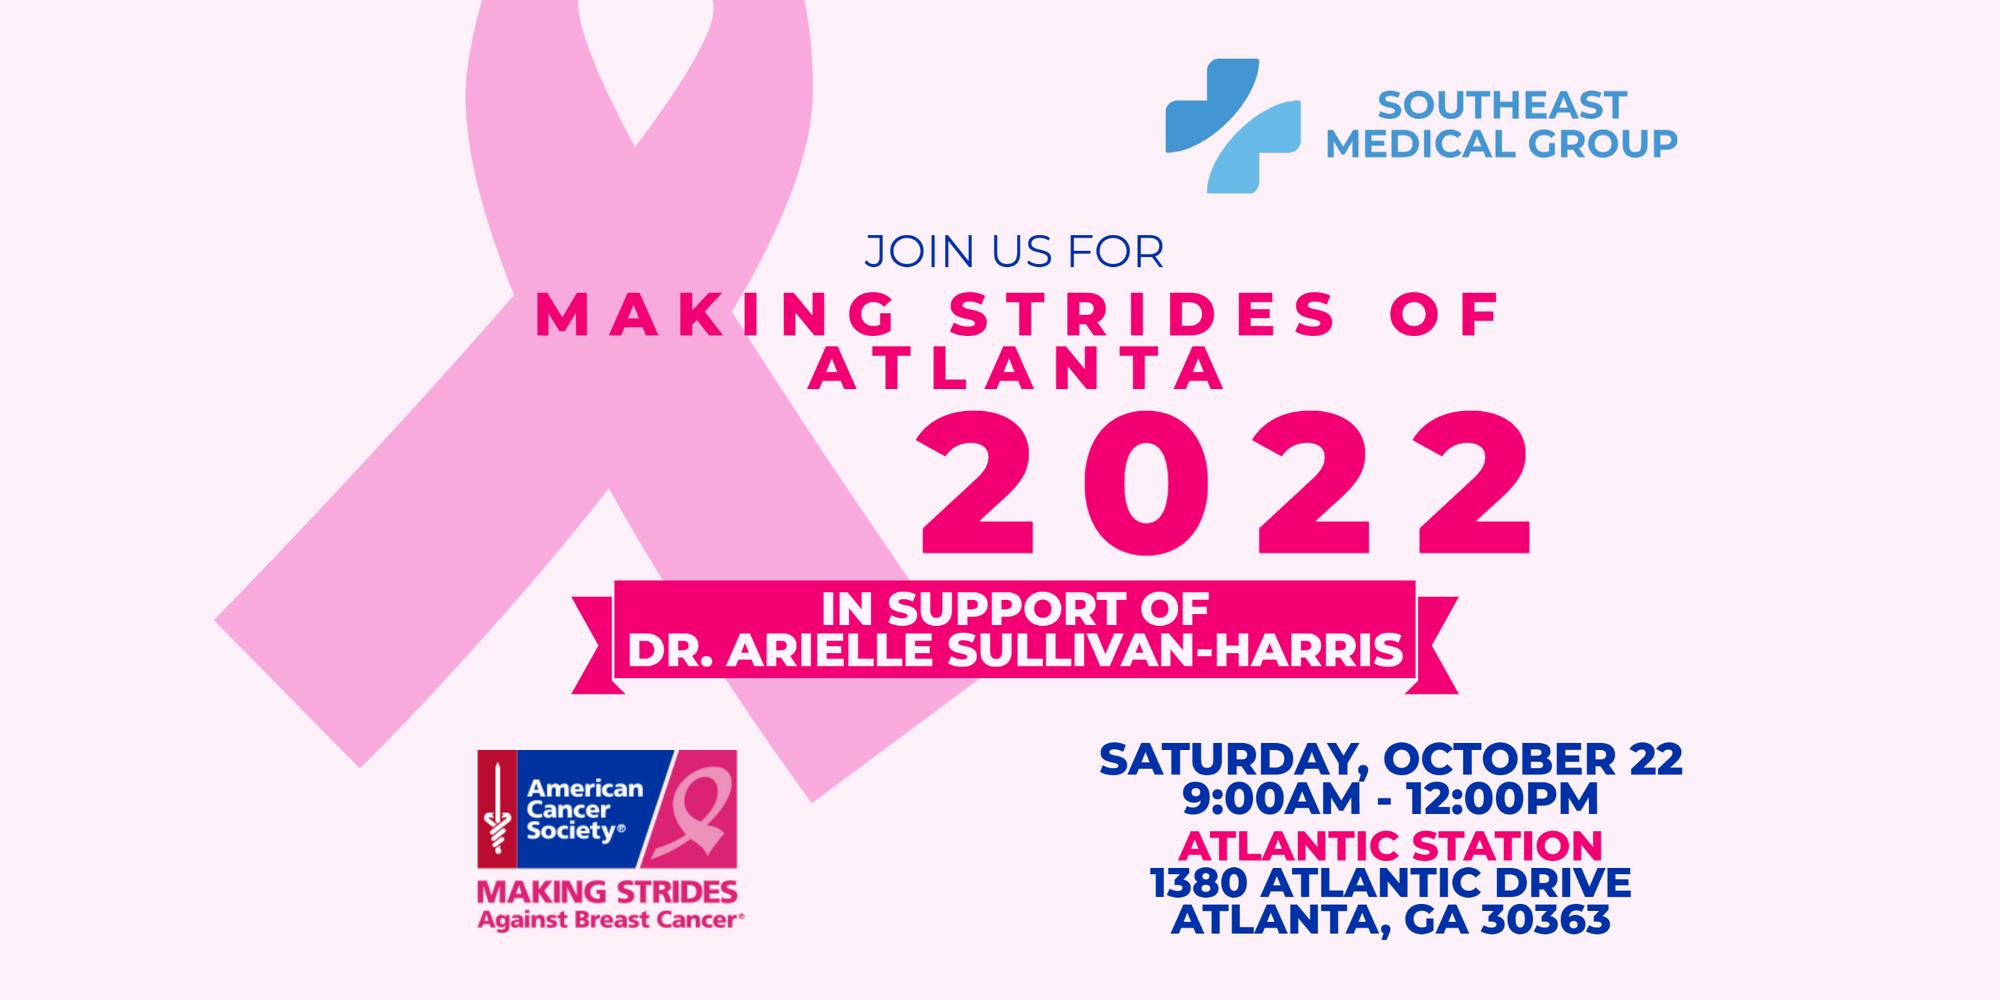 Cover Image for SEMG to Participate in Making Strides of Atlanta 2022